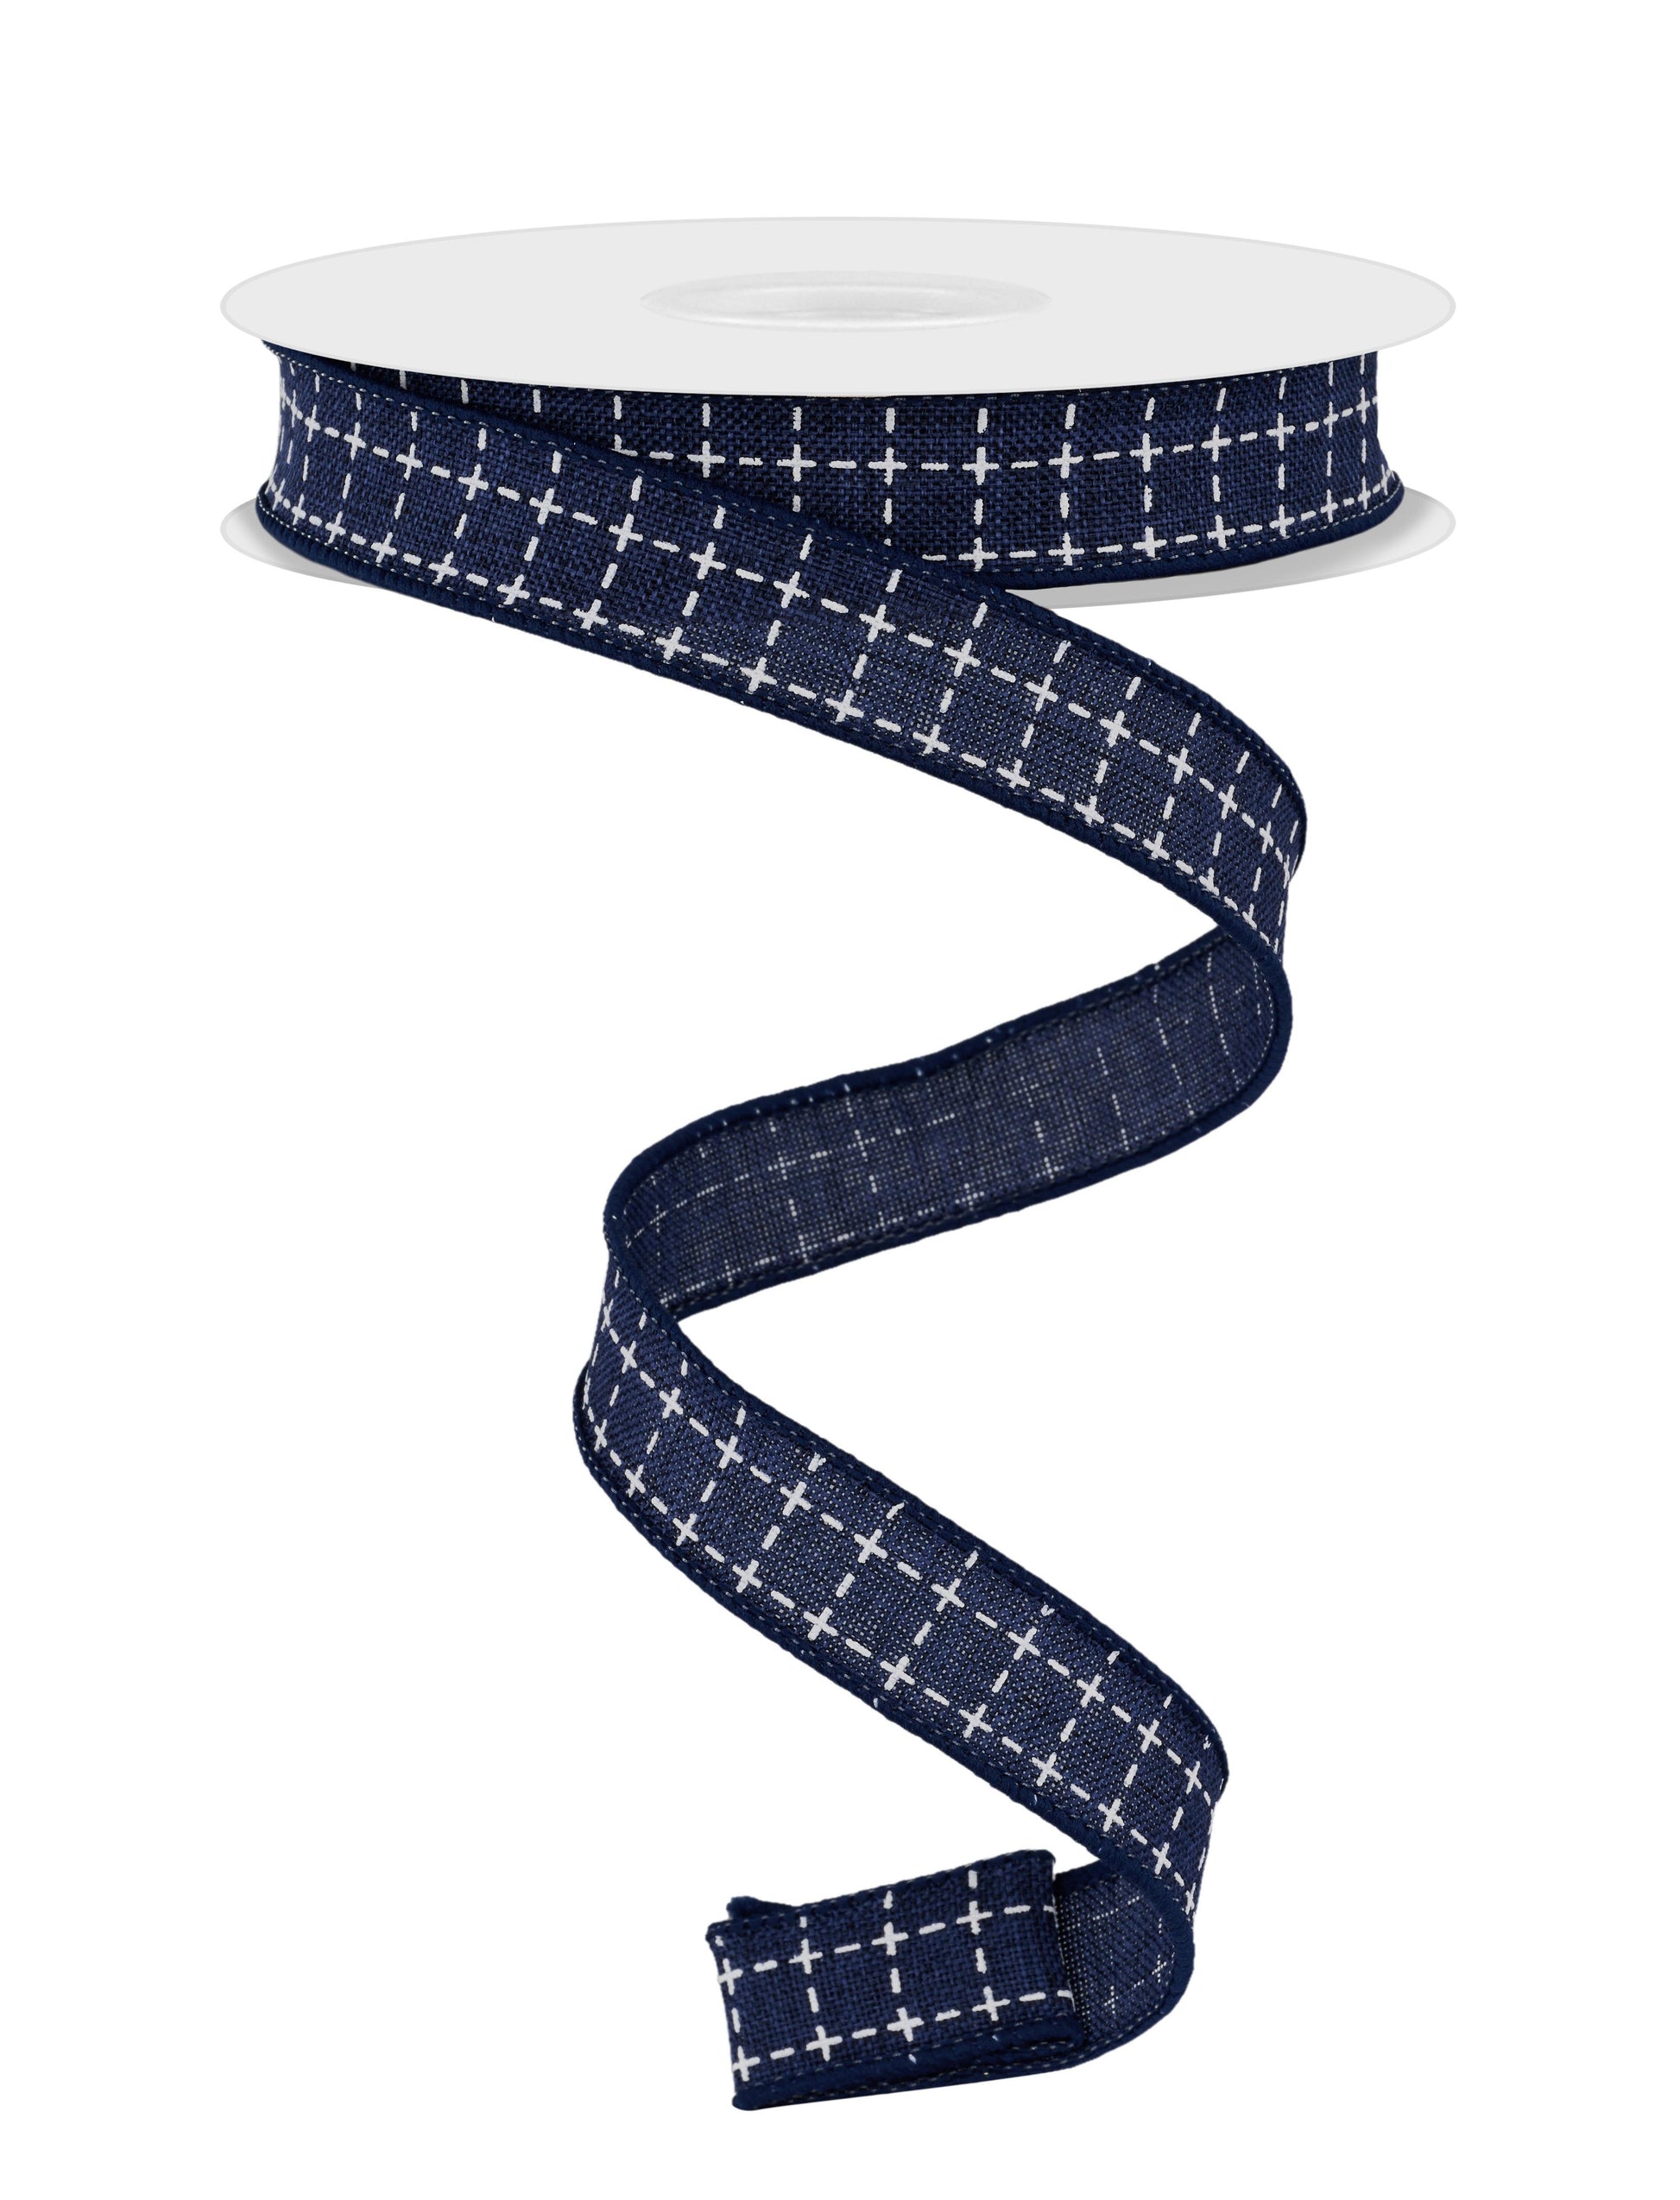 Wired Ribbon * Raised Stitch * Navy Blue and White Canvas * 5/8 x